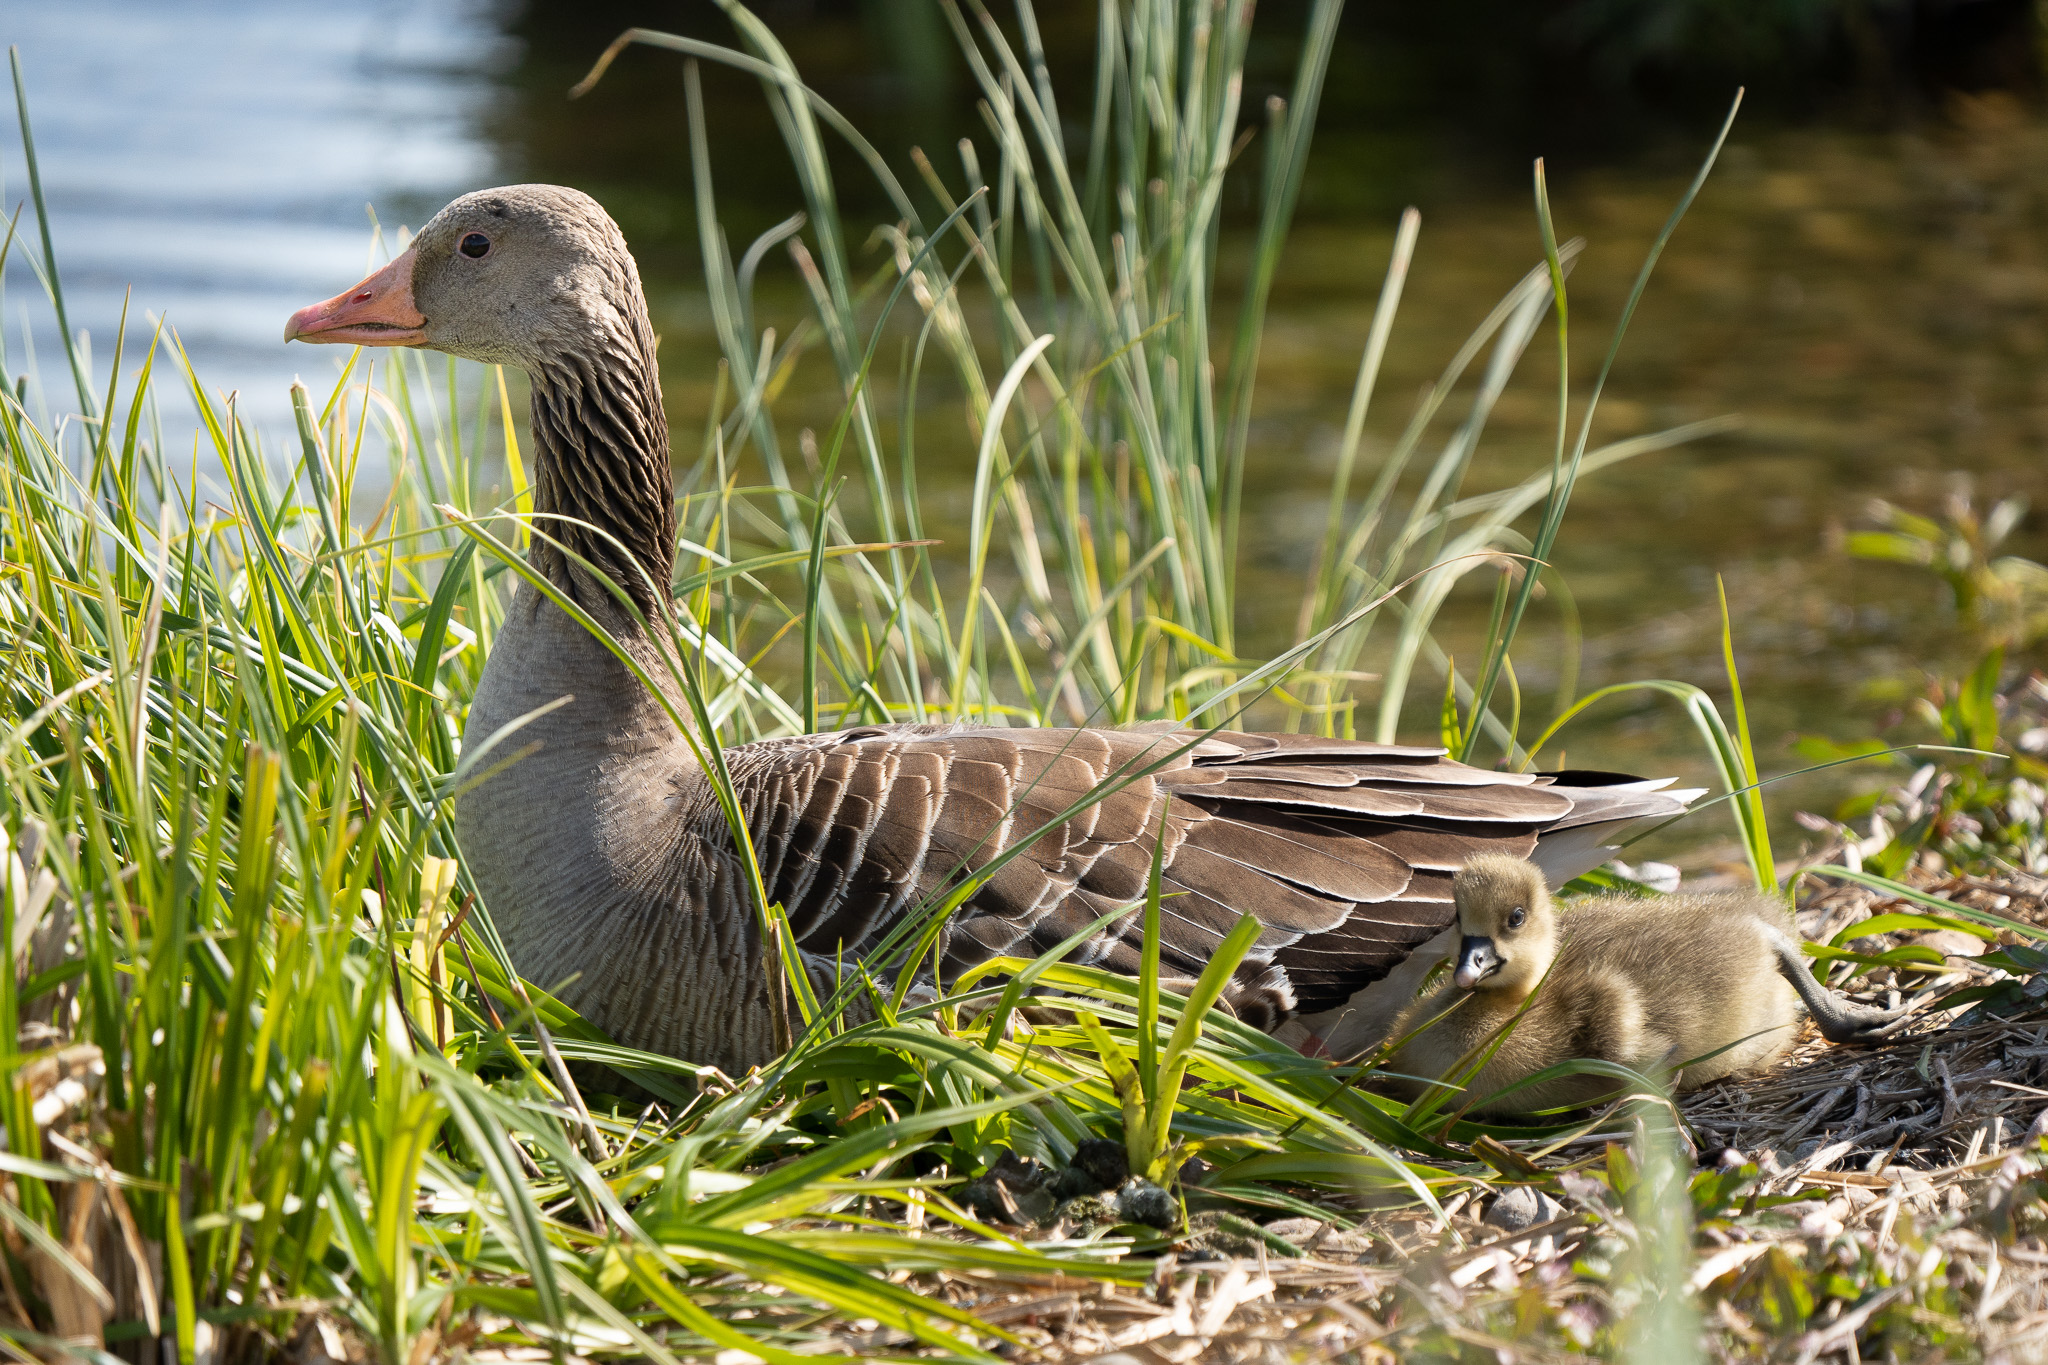 A goose with a gosling